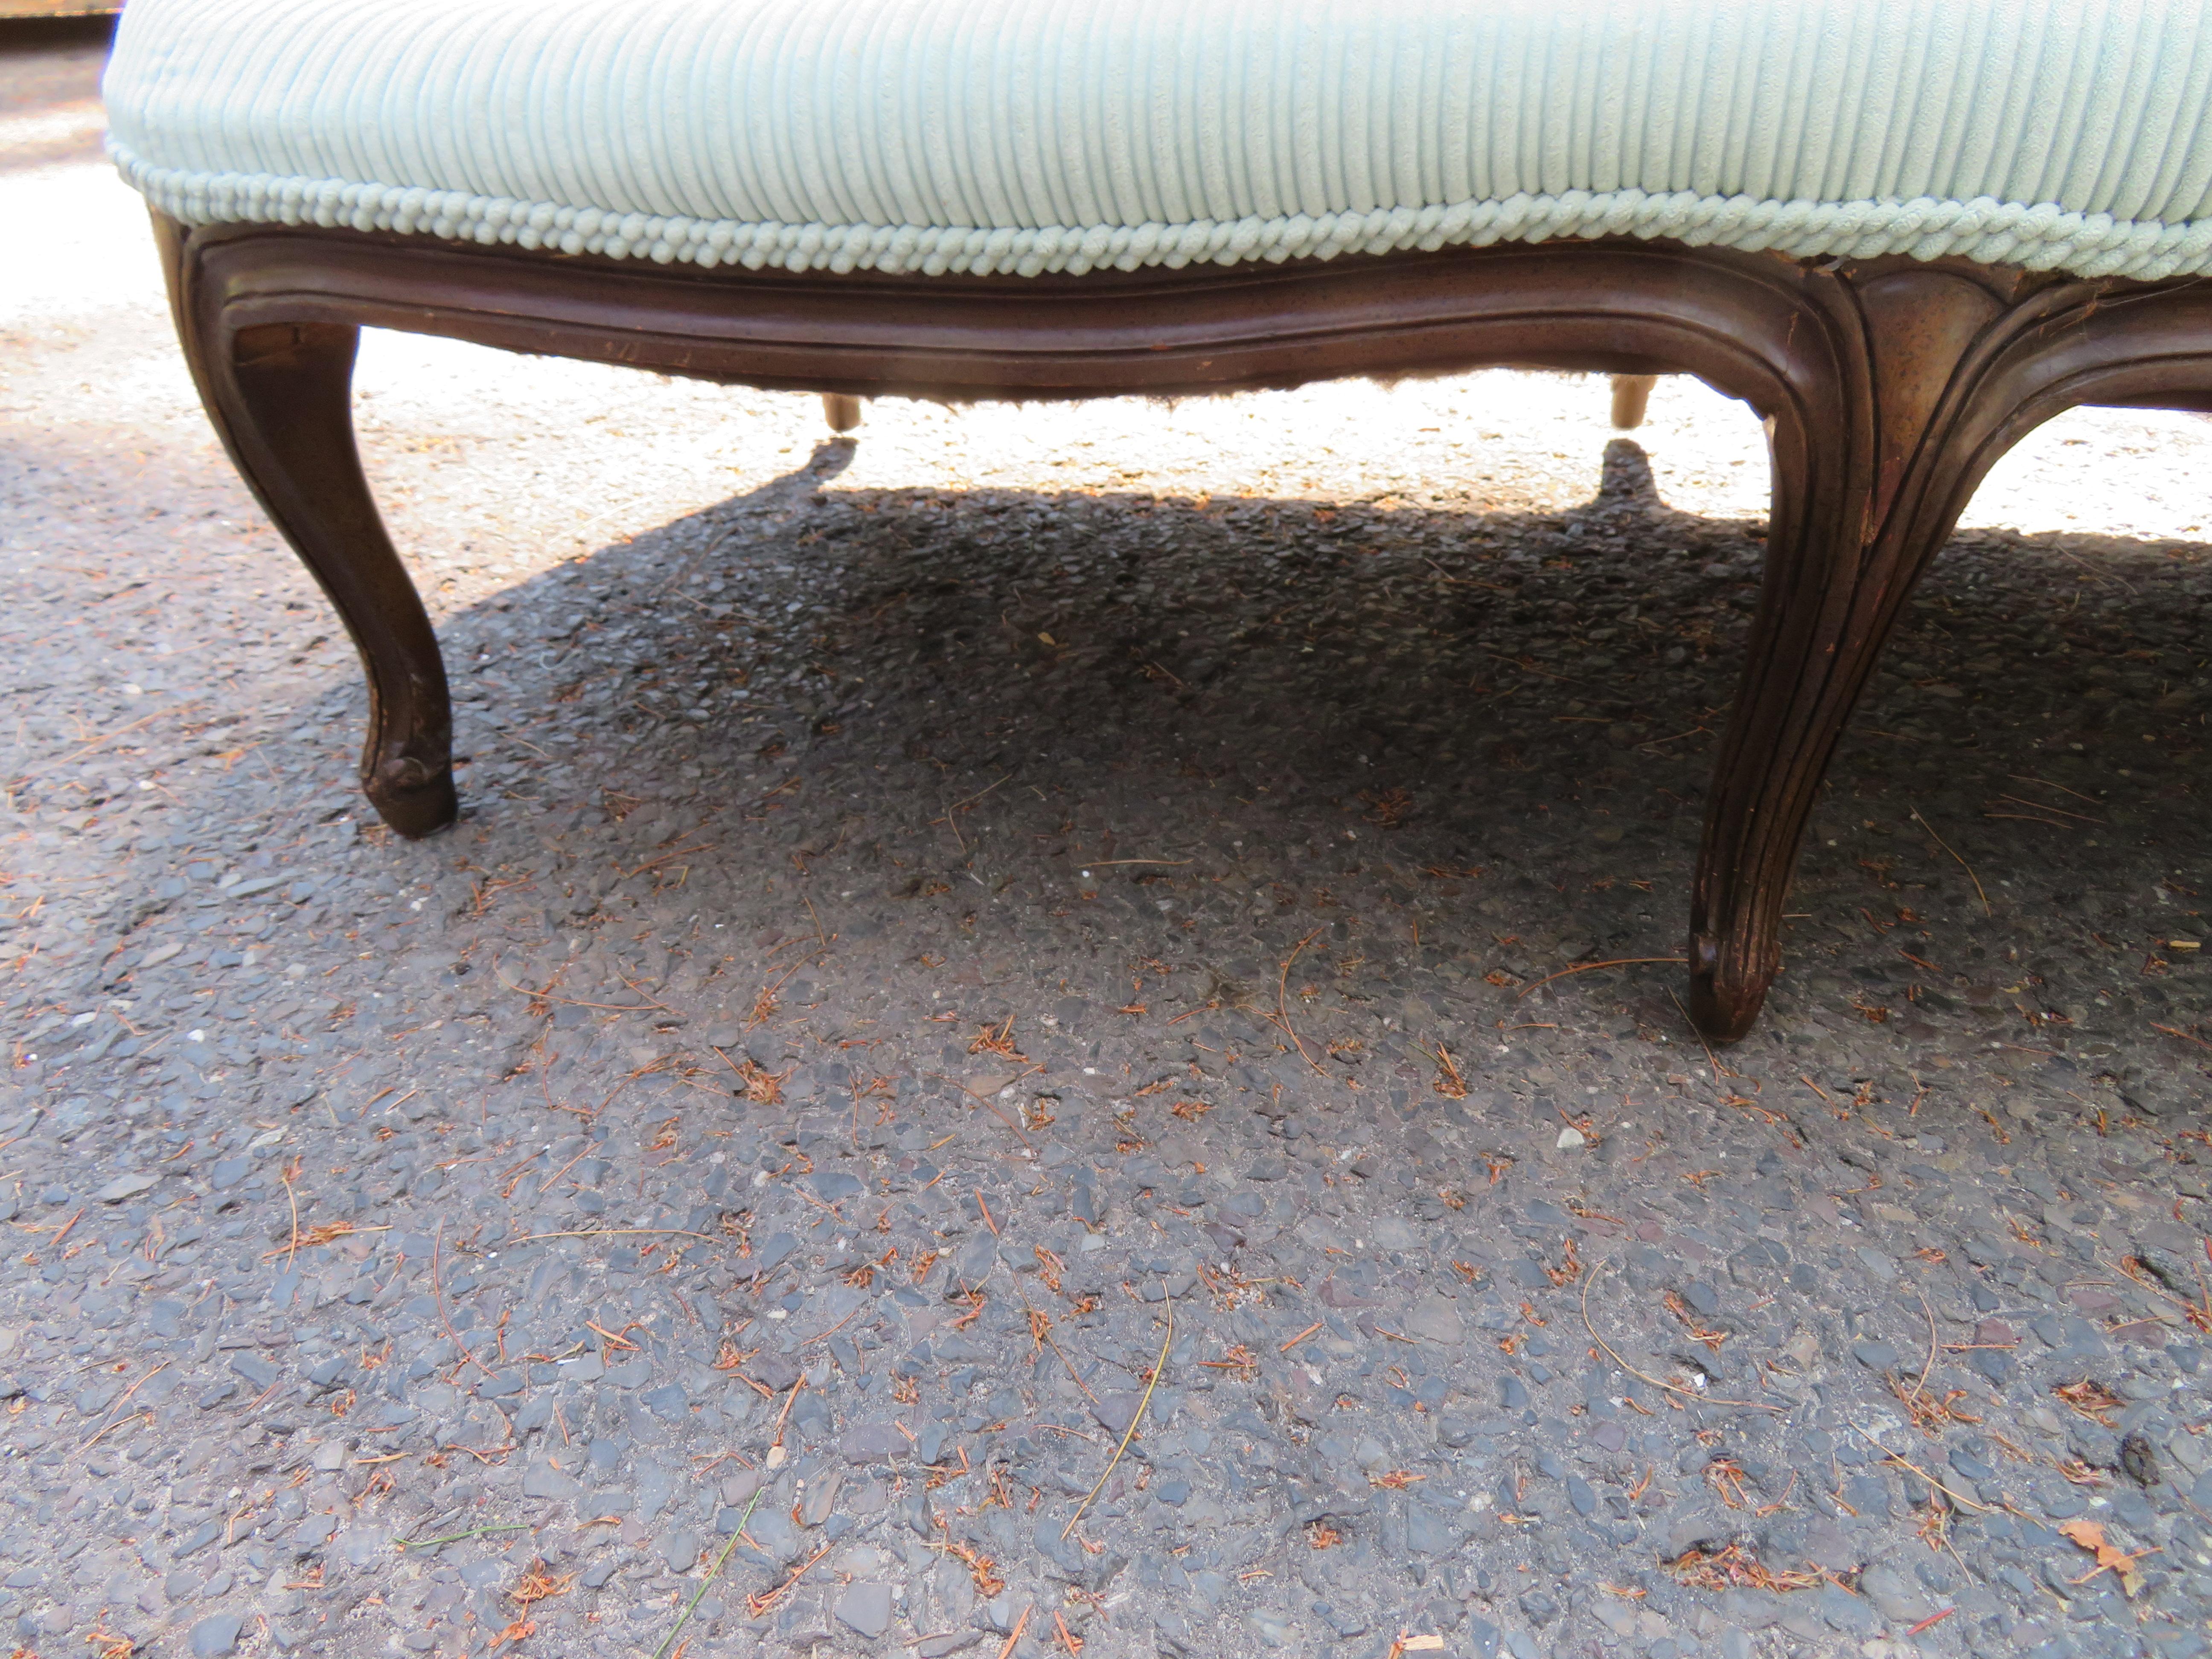 Lovely Louis XIV Style Chaise Lounge In Good Condition For Sale In Pemberton, NJ